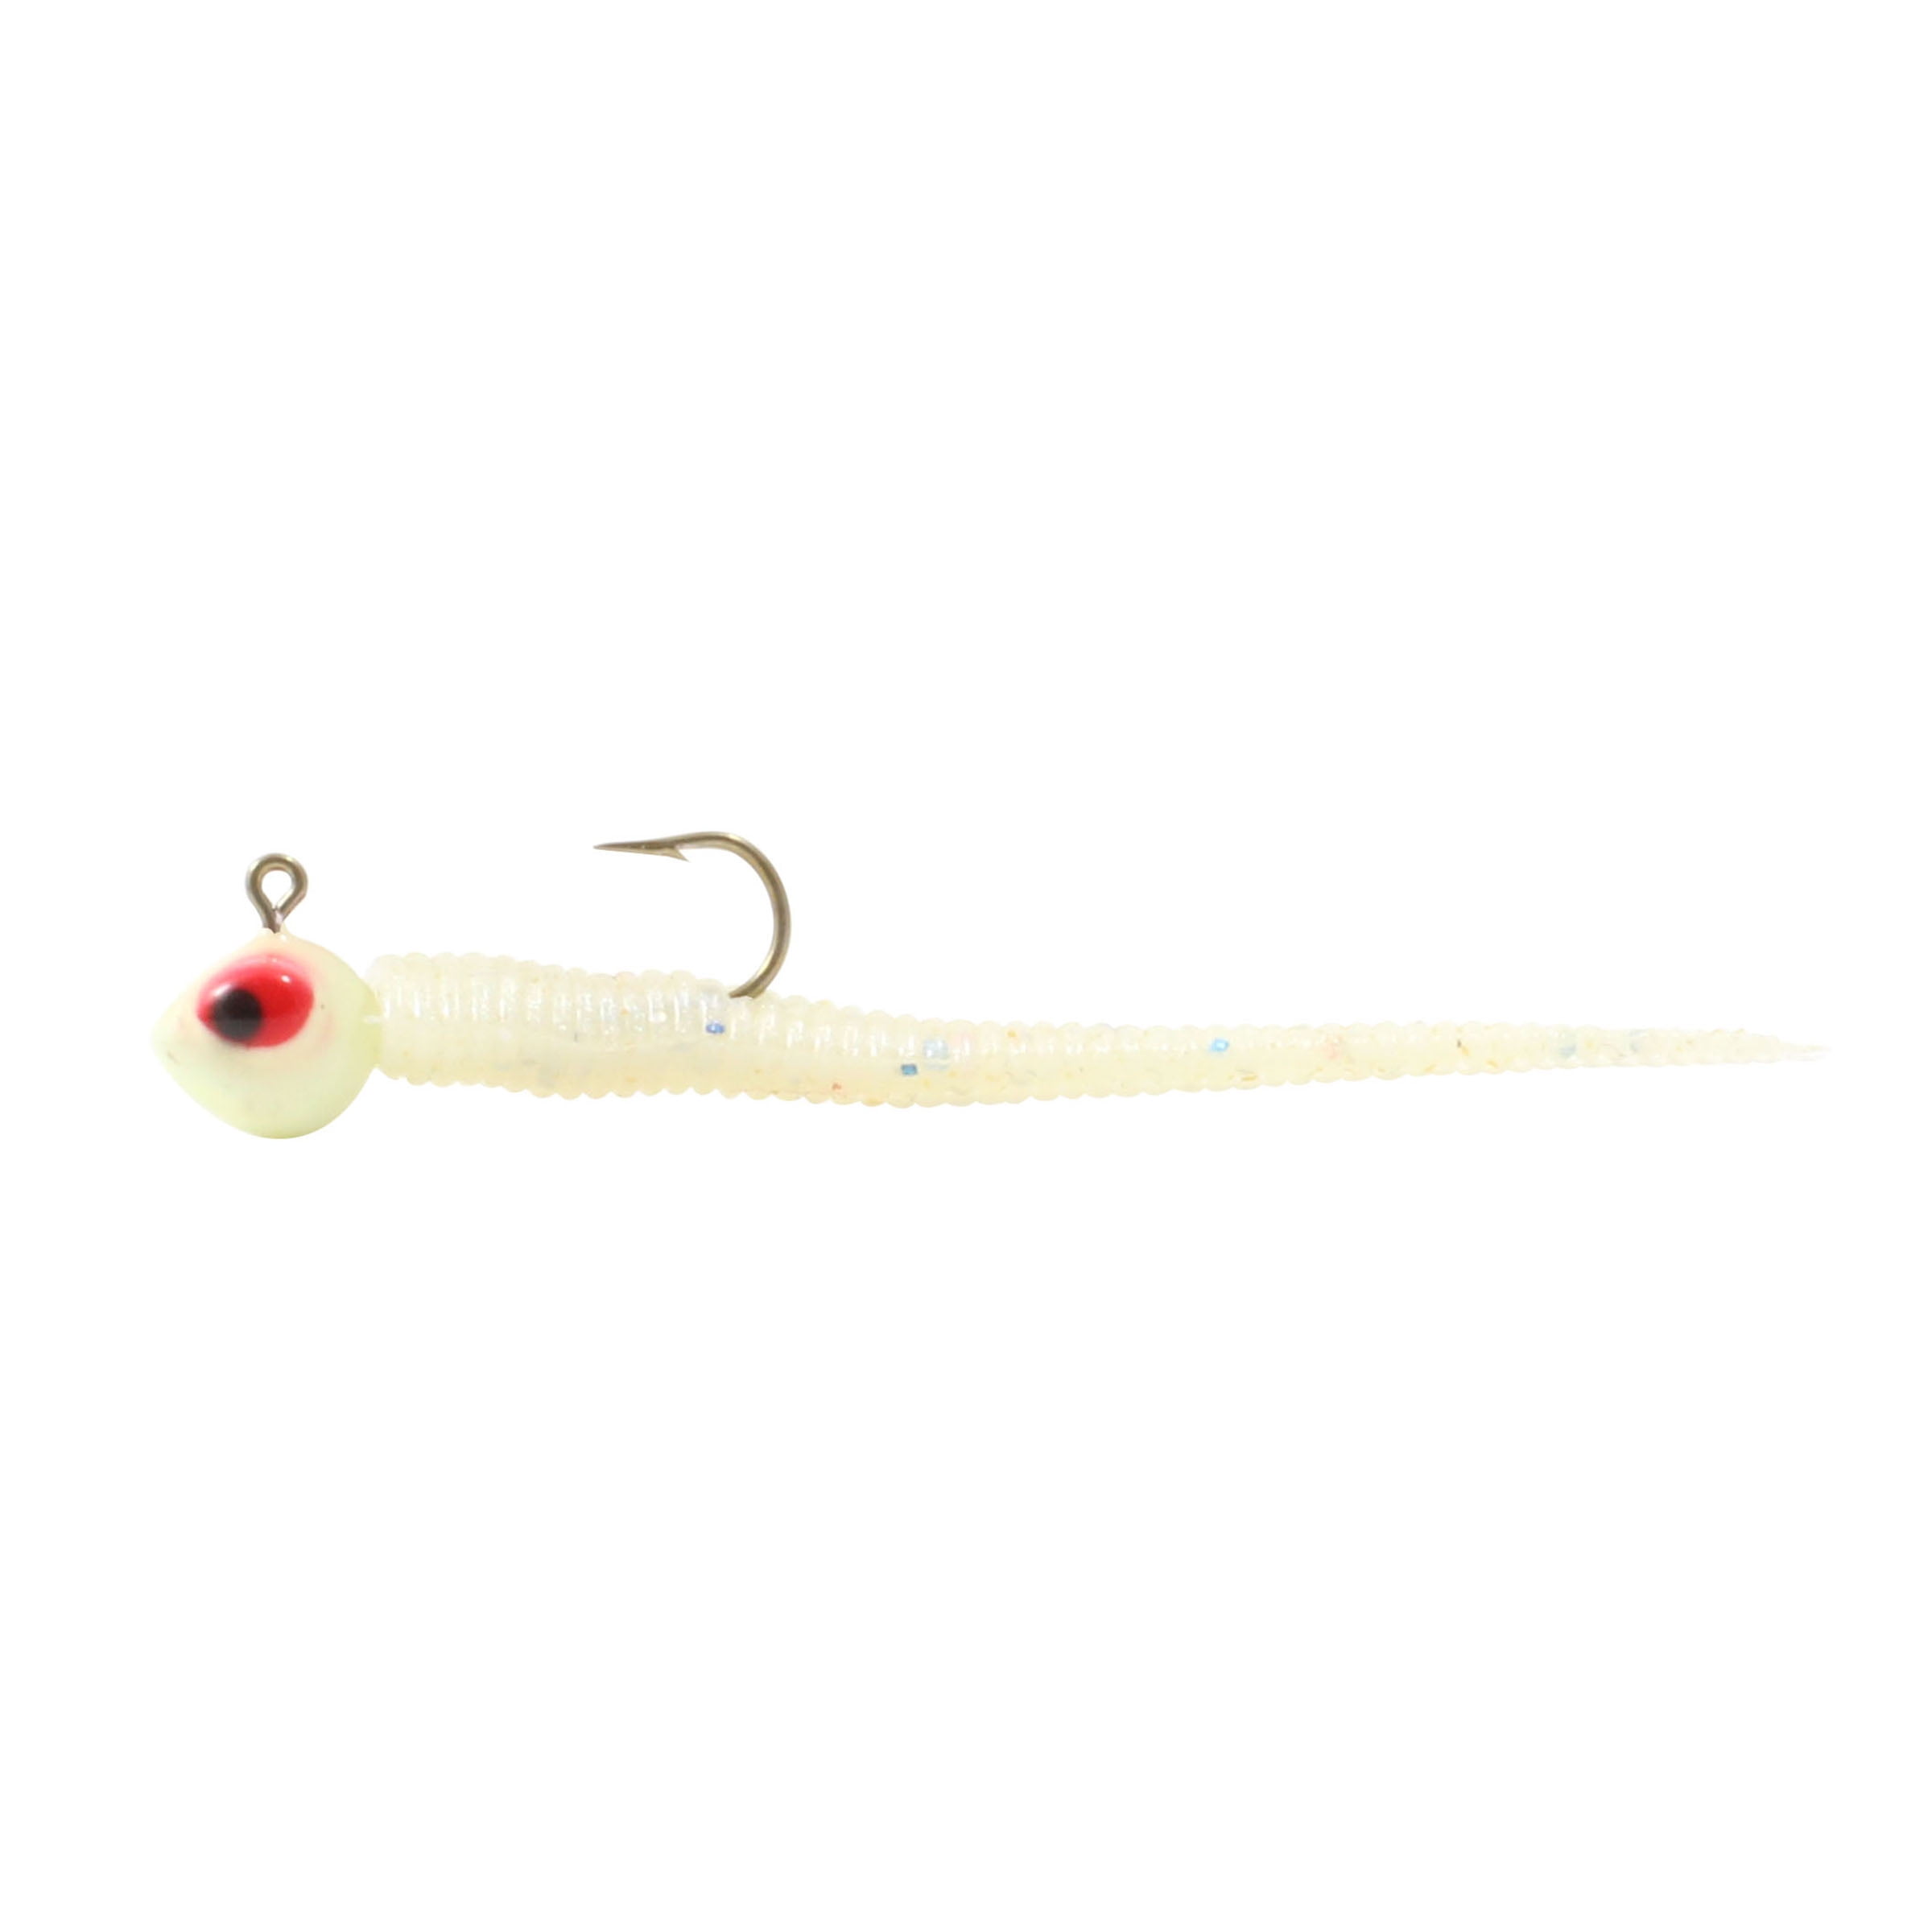 Northland Impulse Rigged Bloodworm Jig Glo White